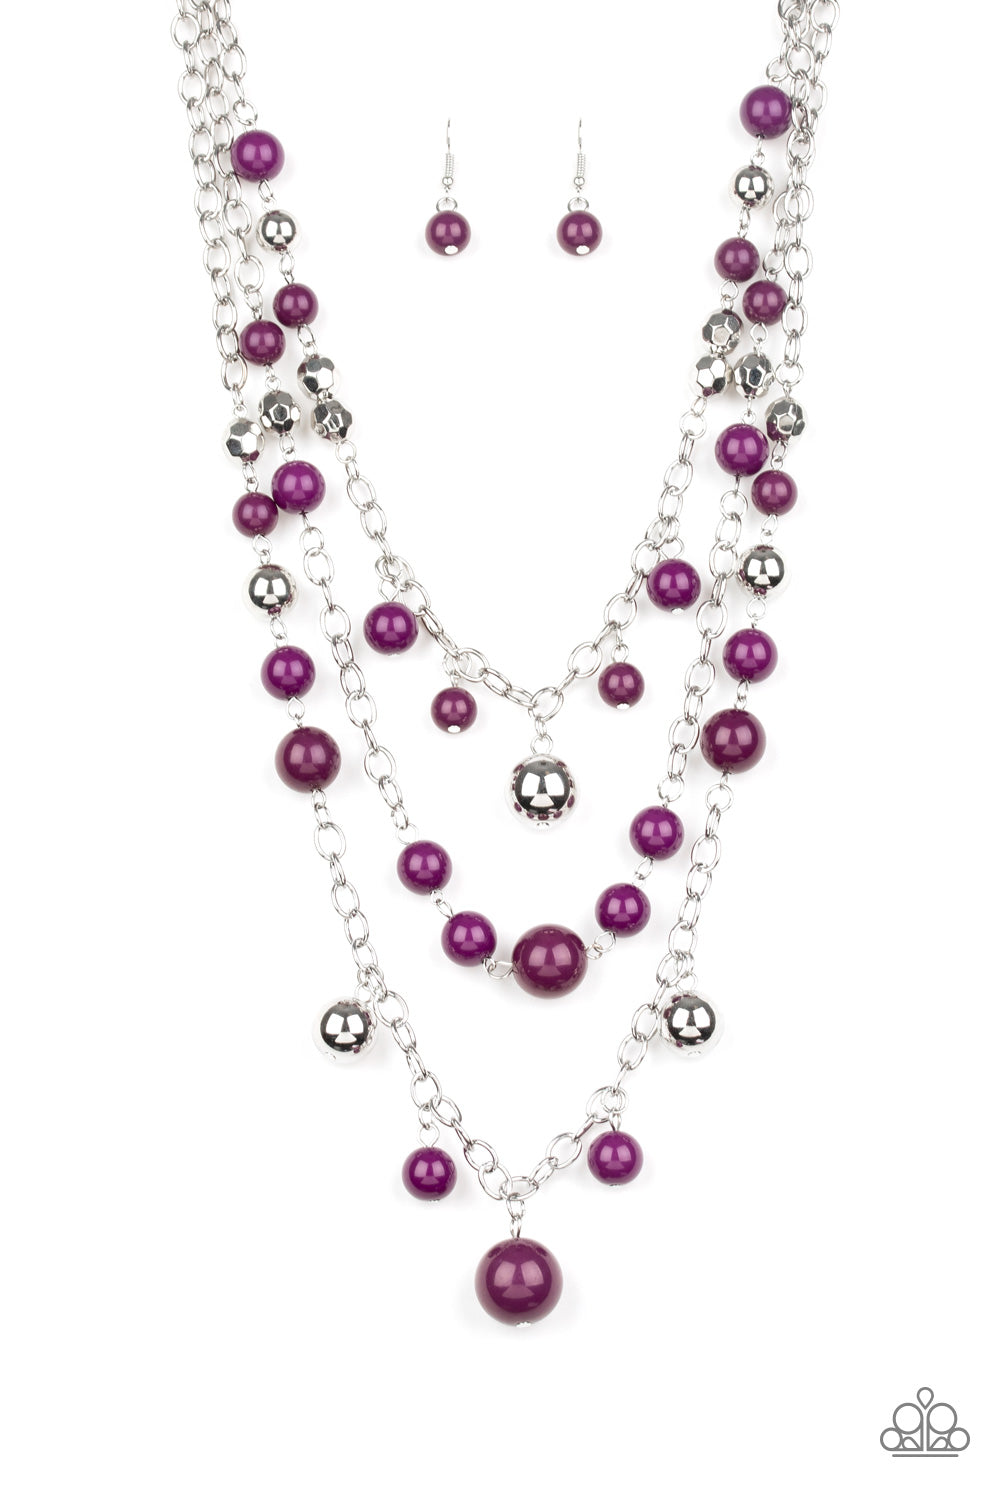 Paparazzi Accessories The Partygoer Purple Necklaces - Lady T Accessories